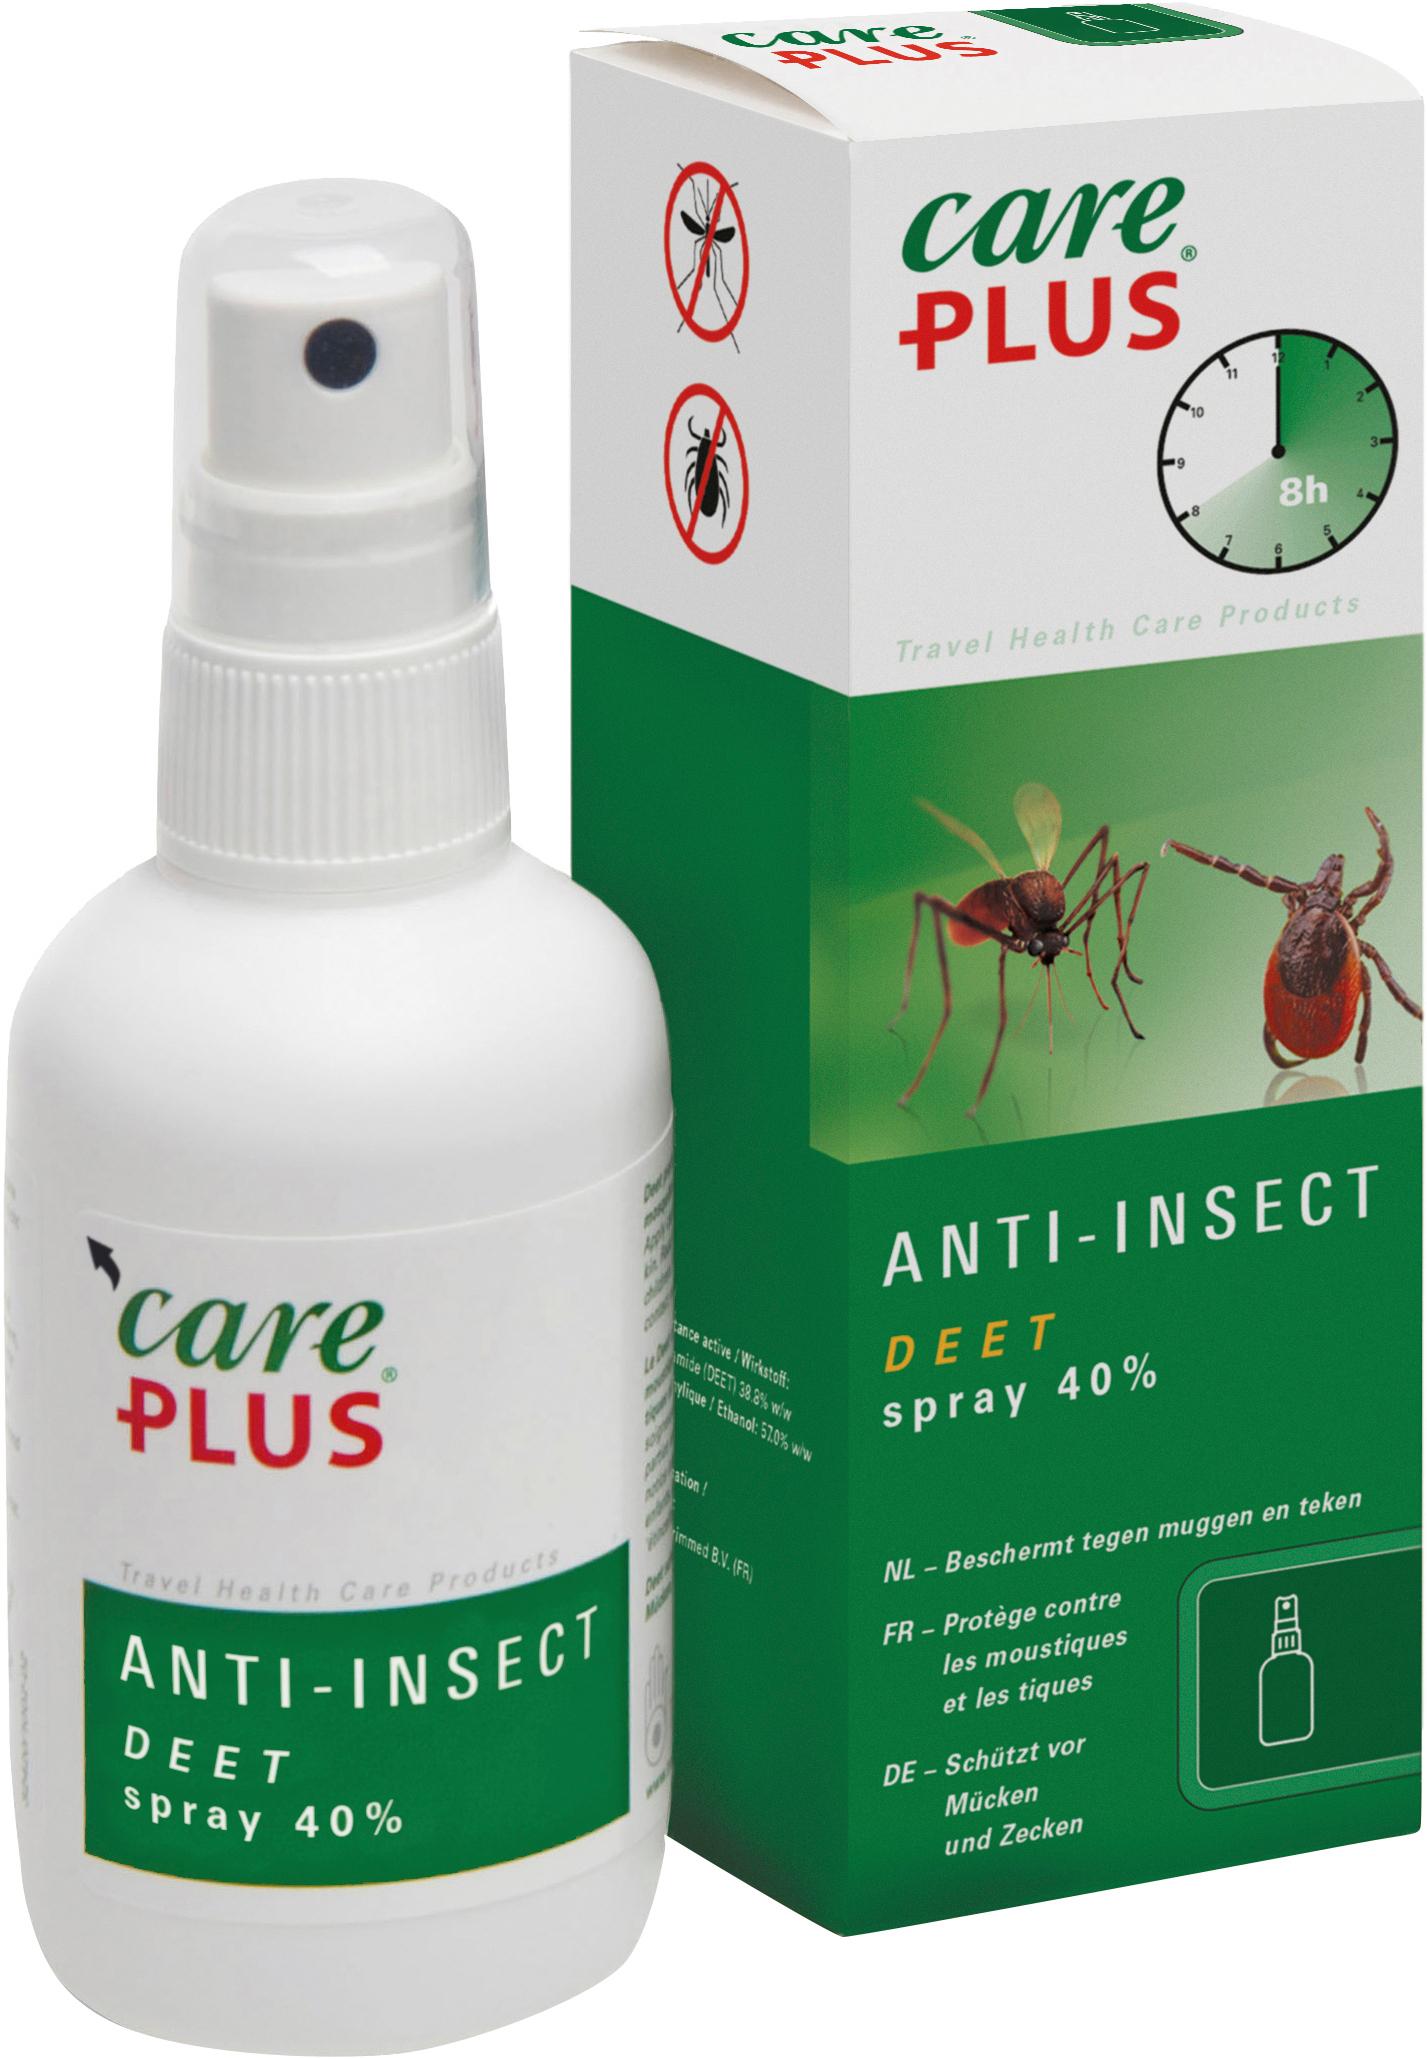 Image of Care Plus Anti-Insect Deet 40% Insektenschutz